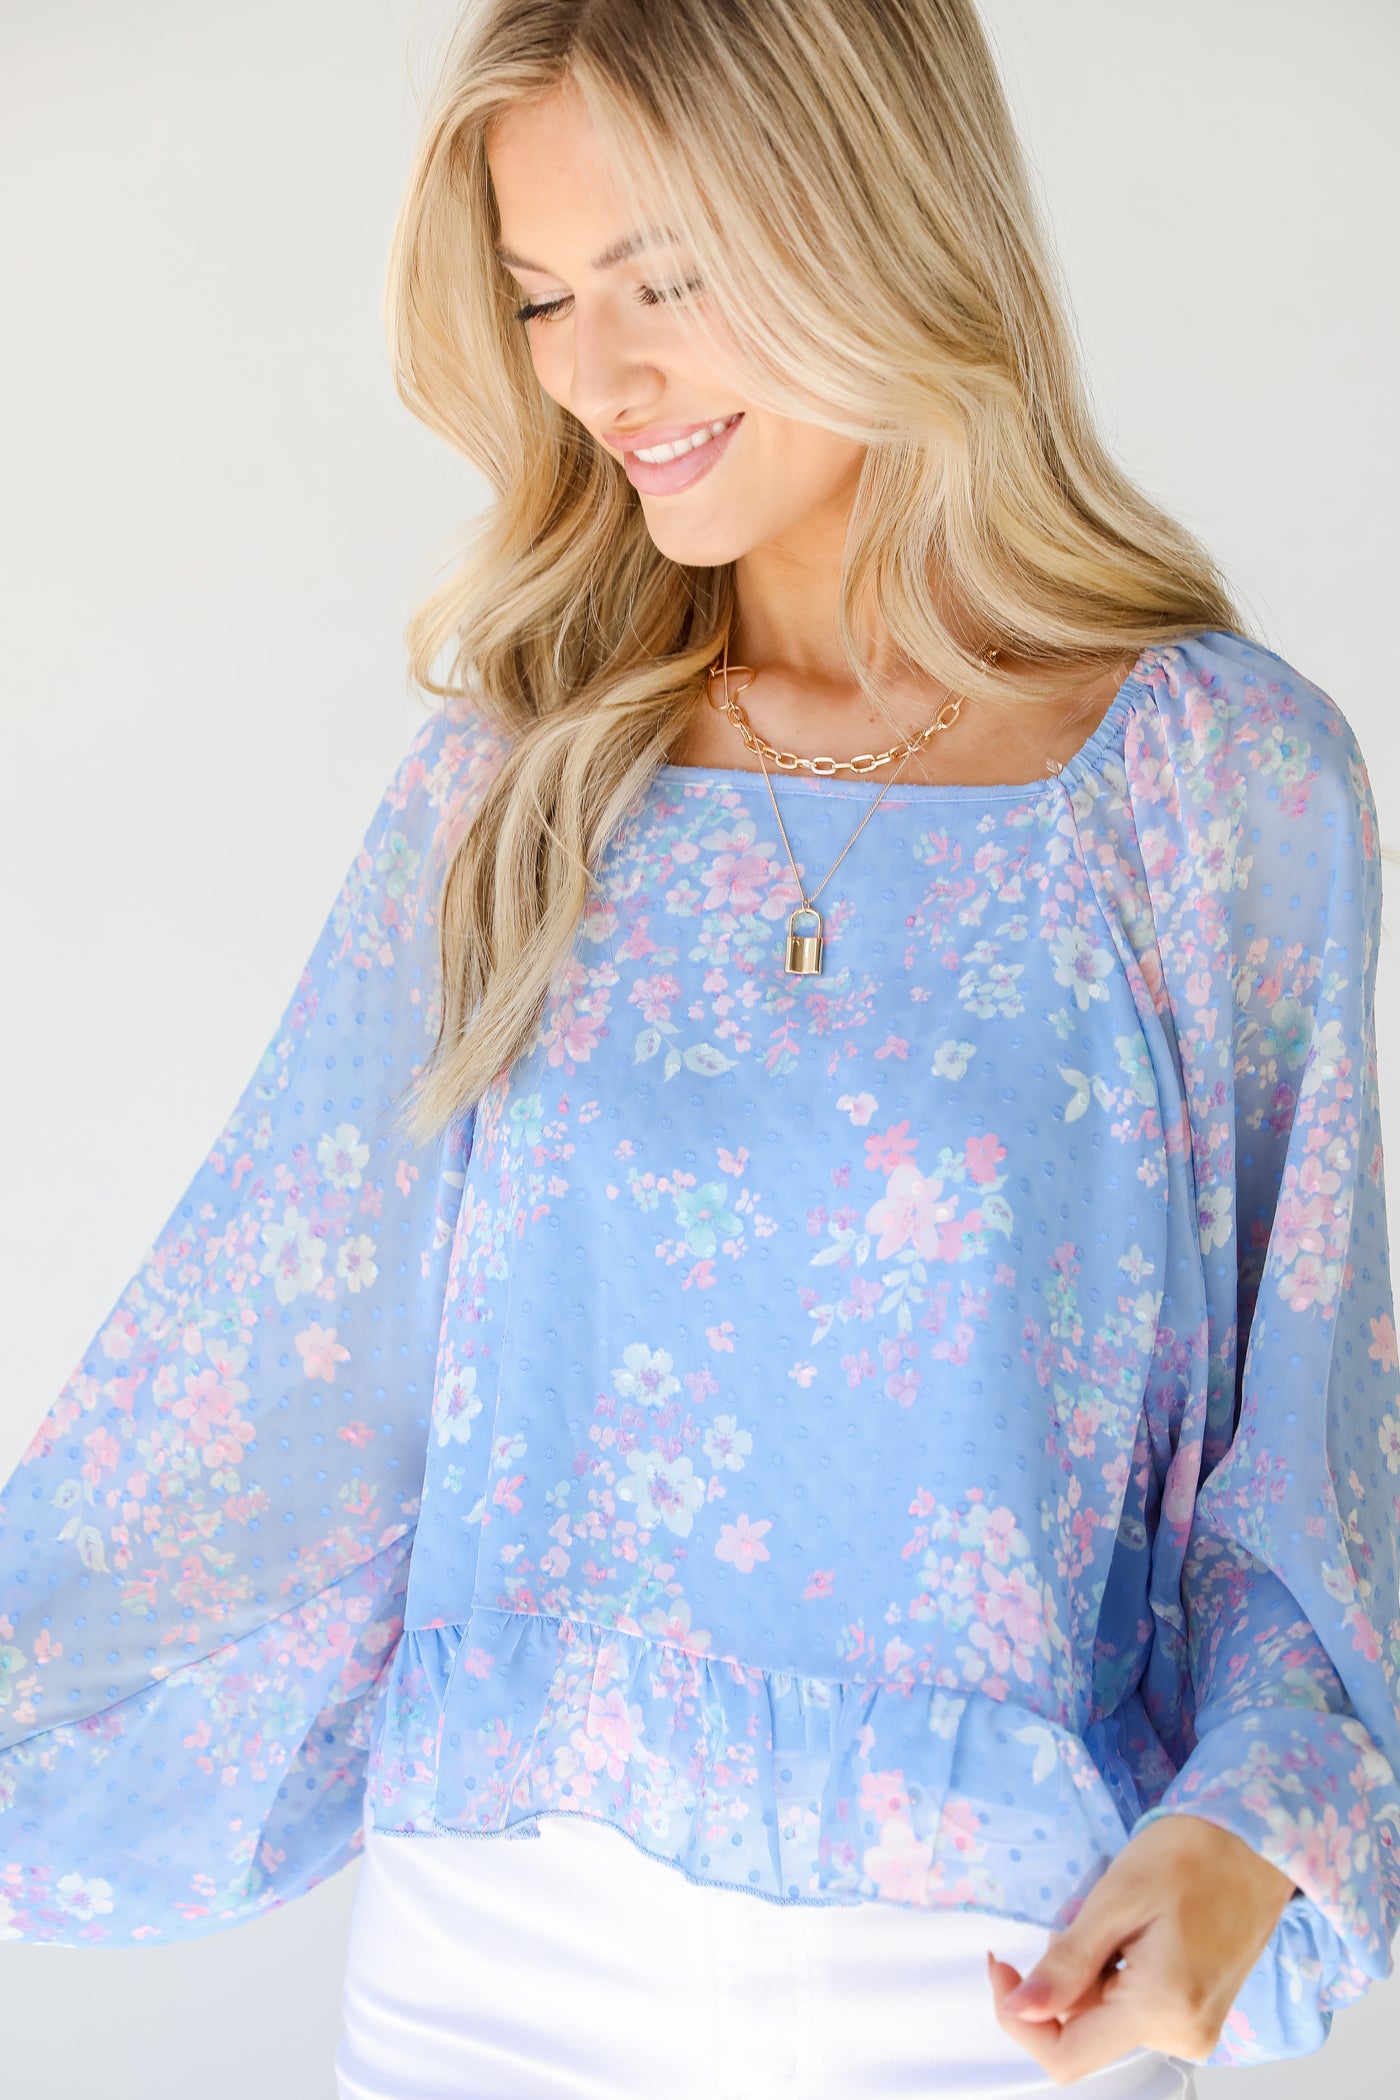 Floral Blouse from dress up